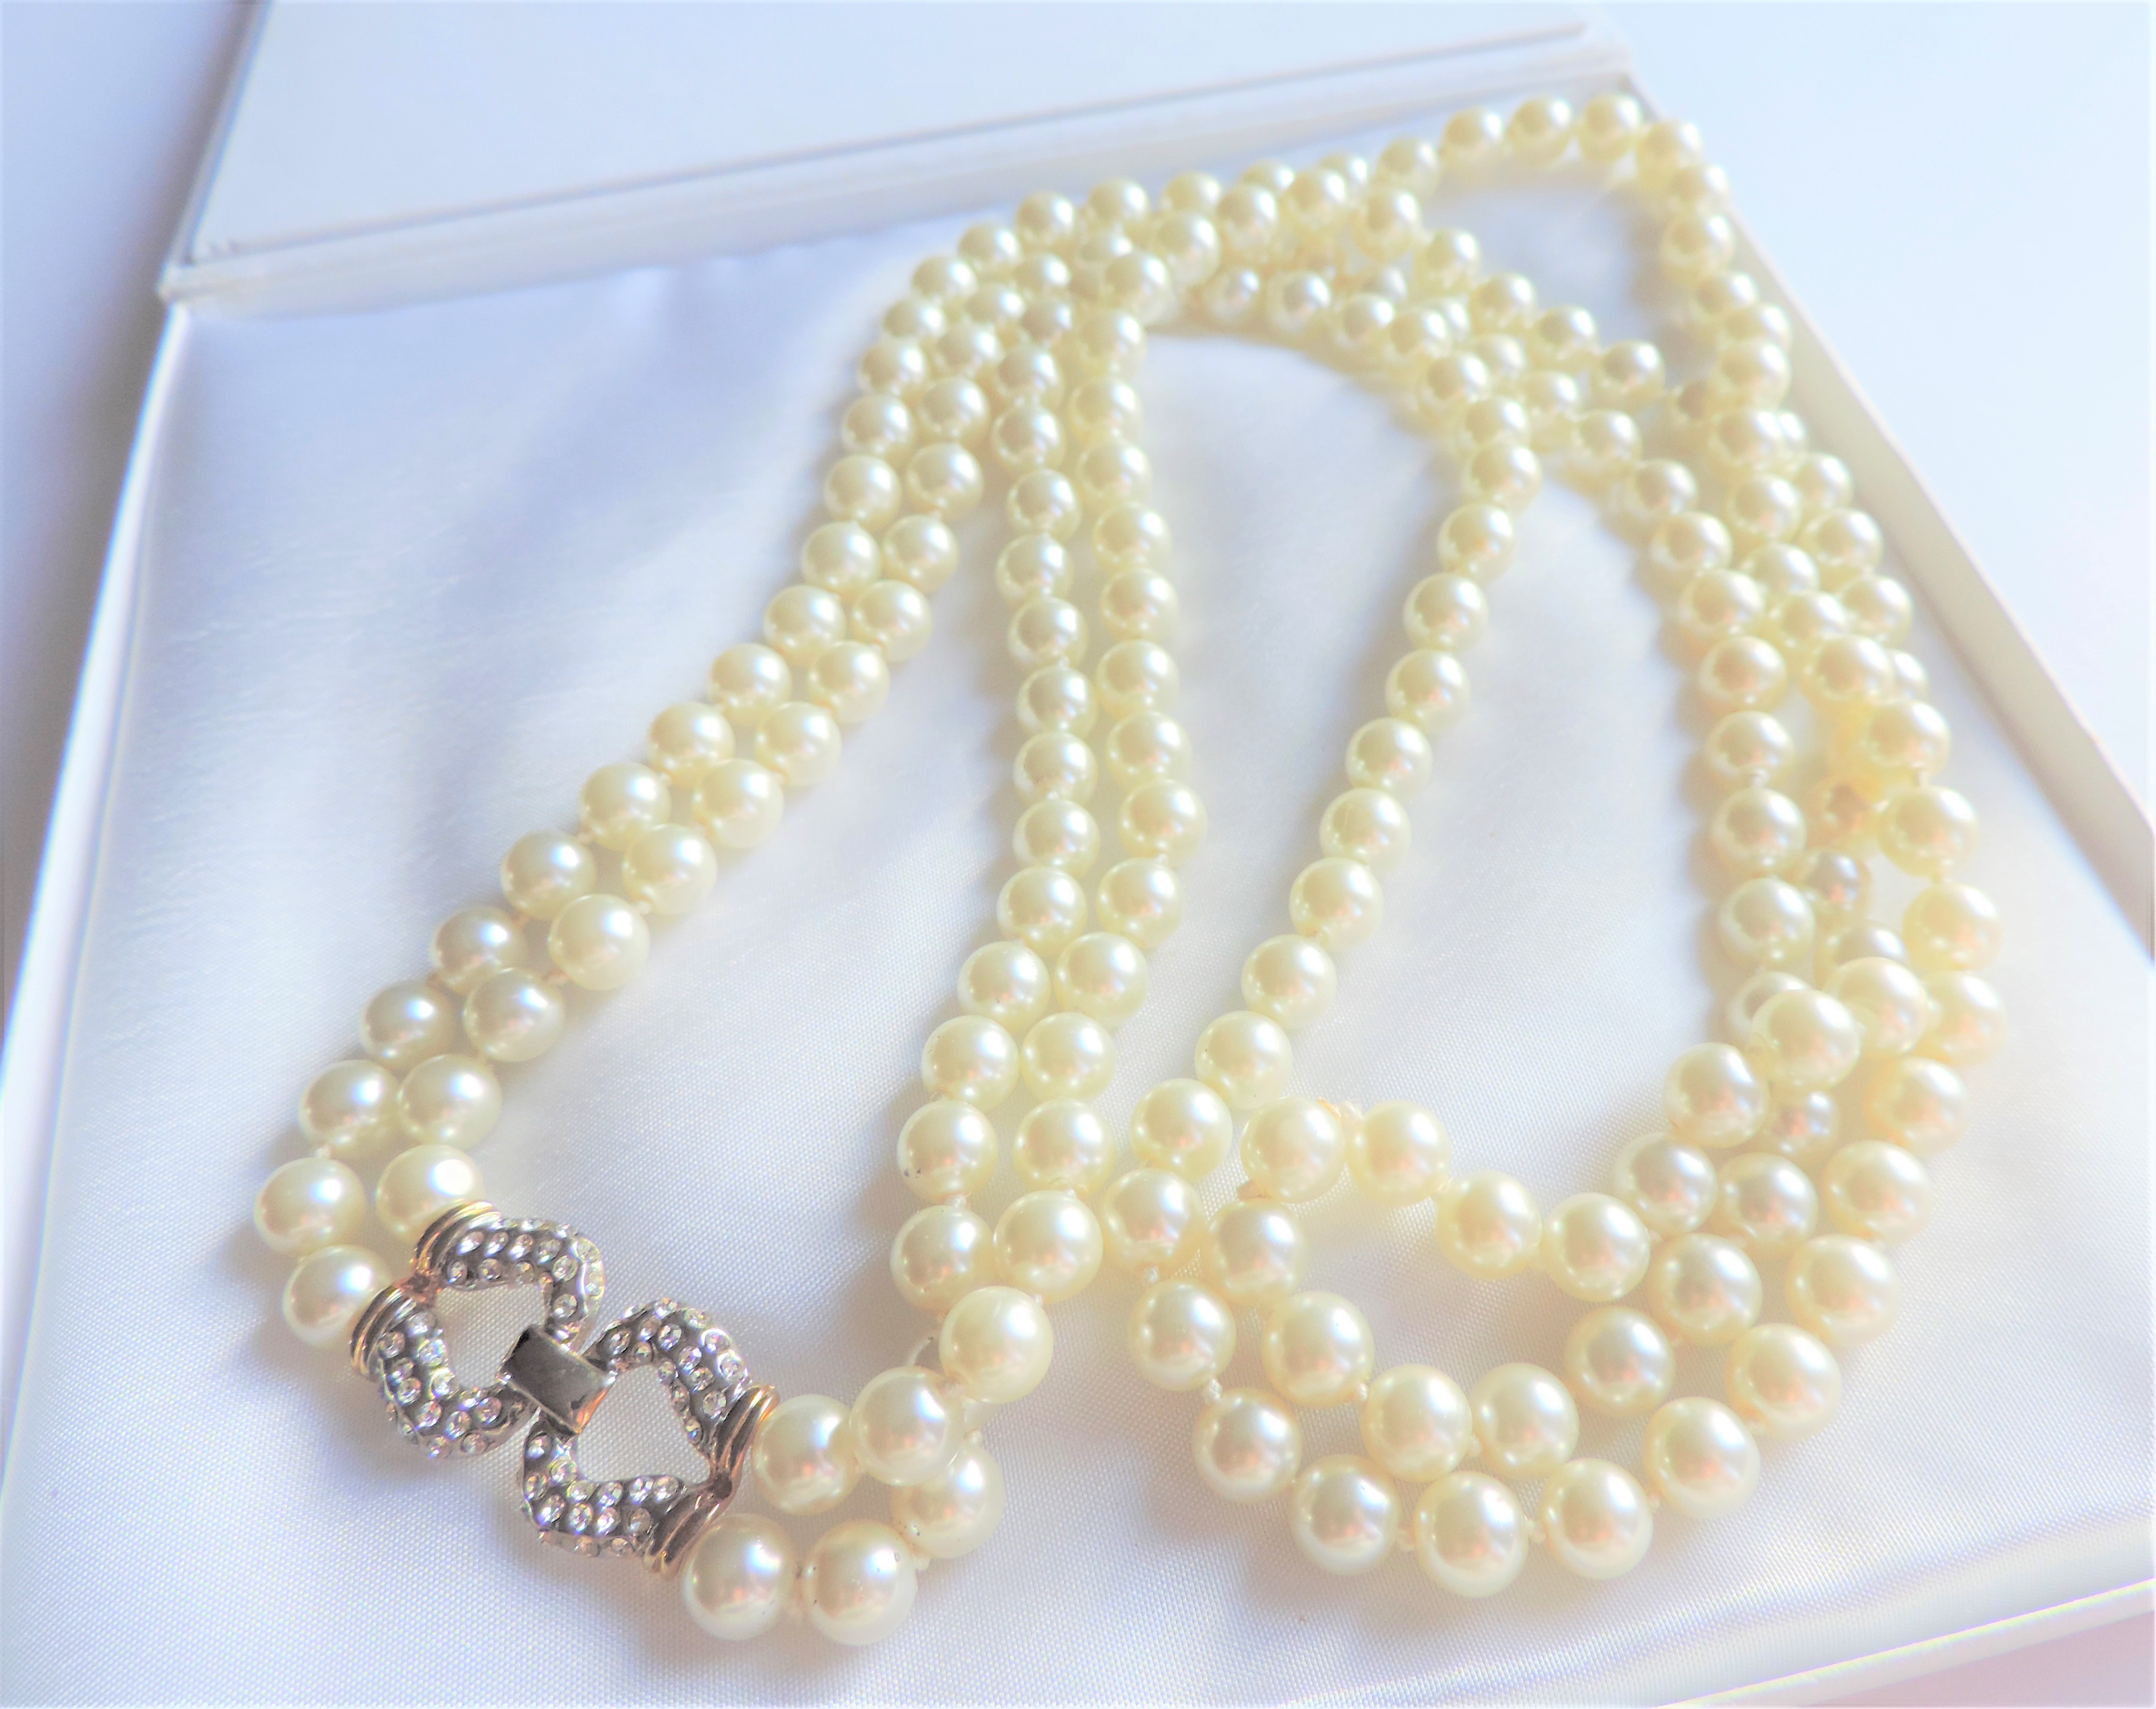 26 Inch Double Strand Pearl Necklace 7mm Size Pearls - Image 5 of 5